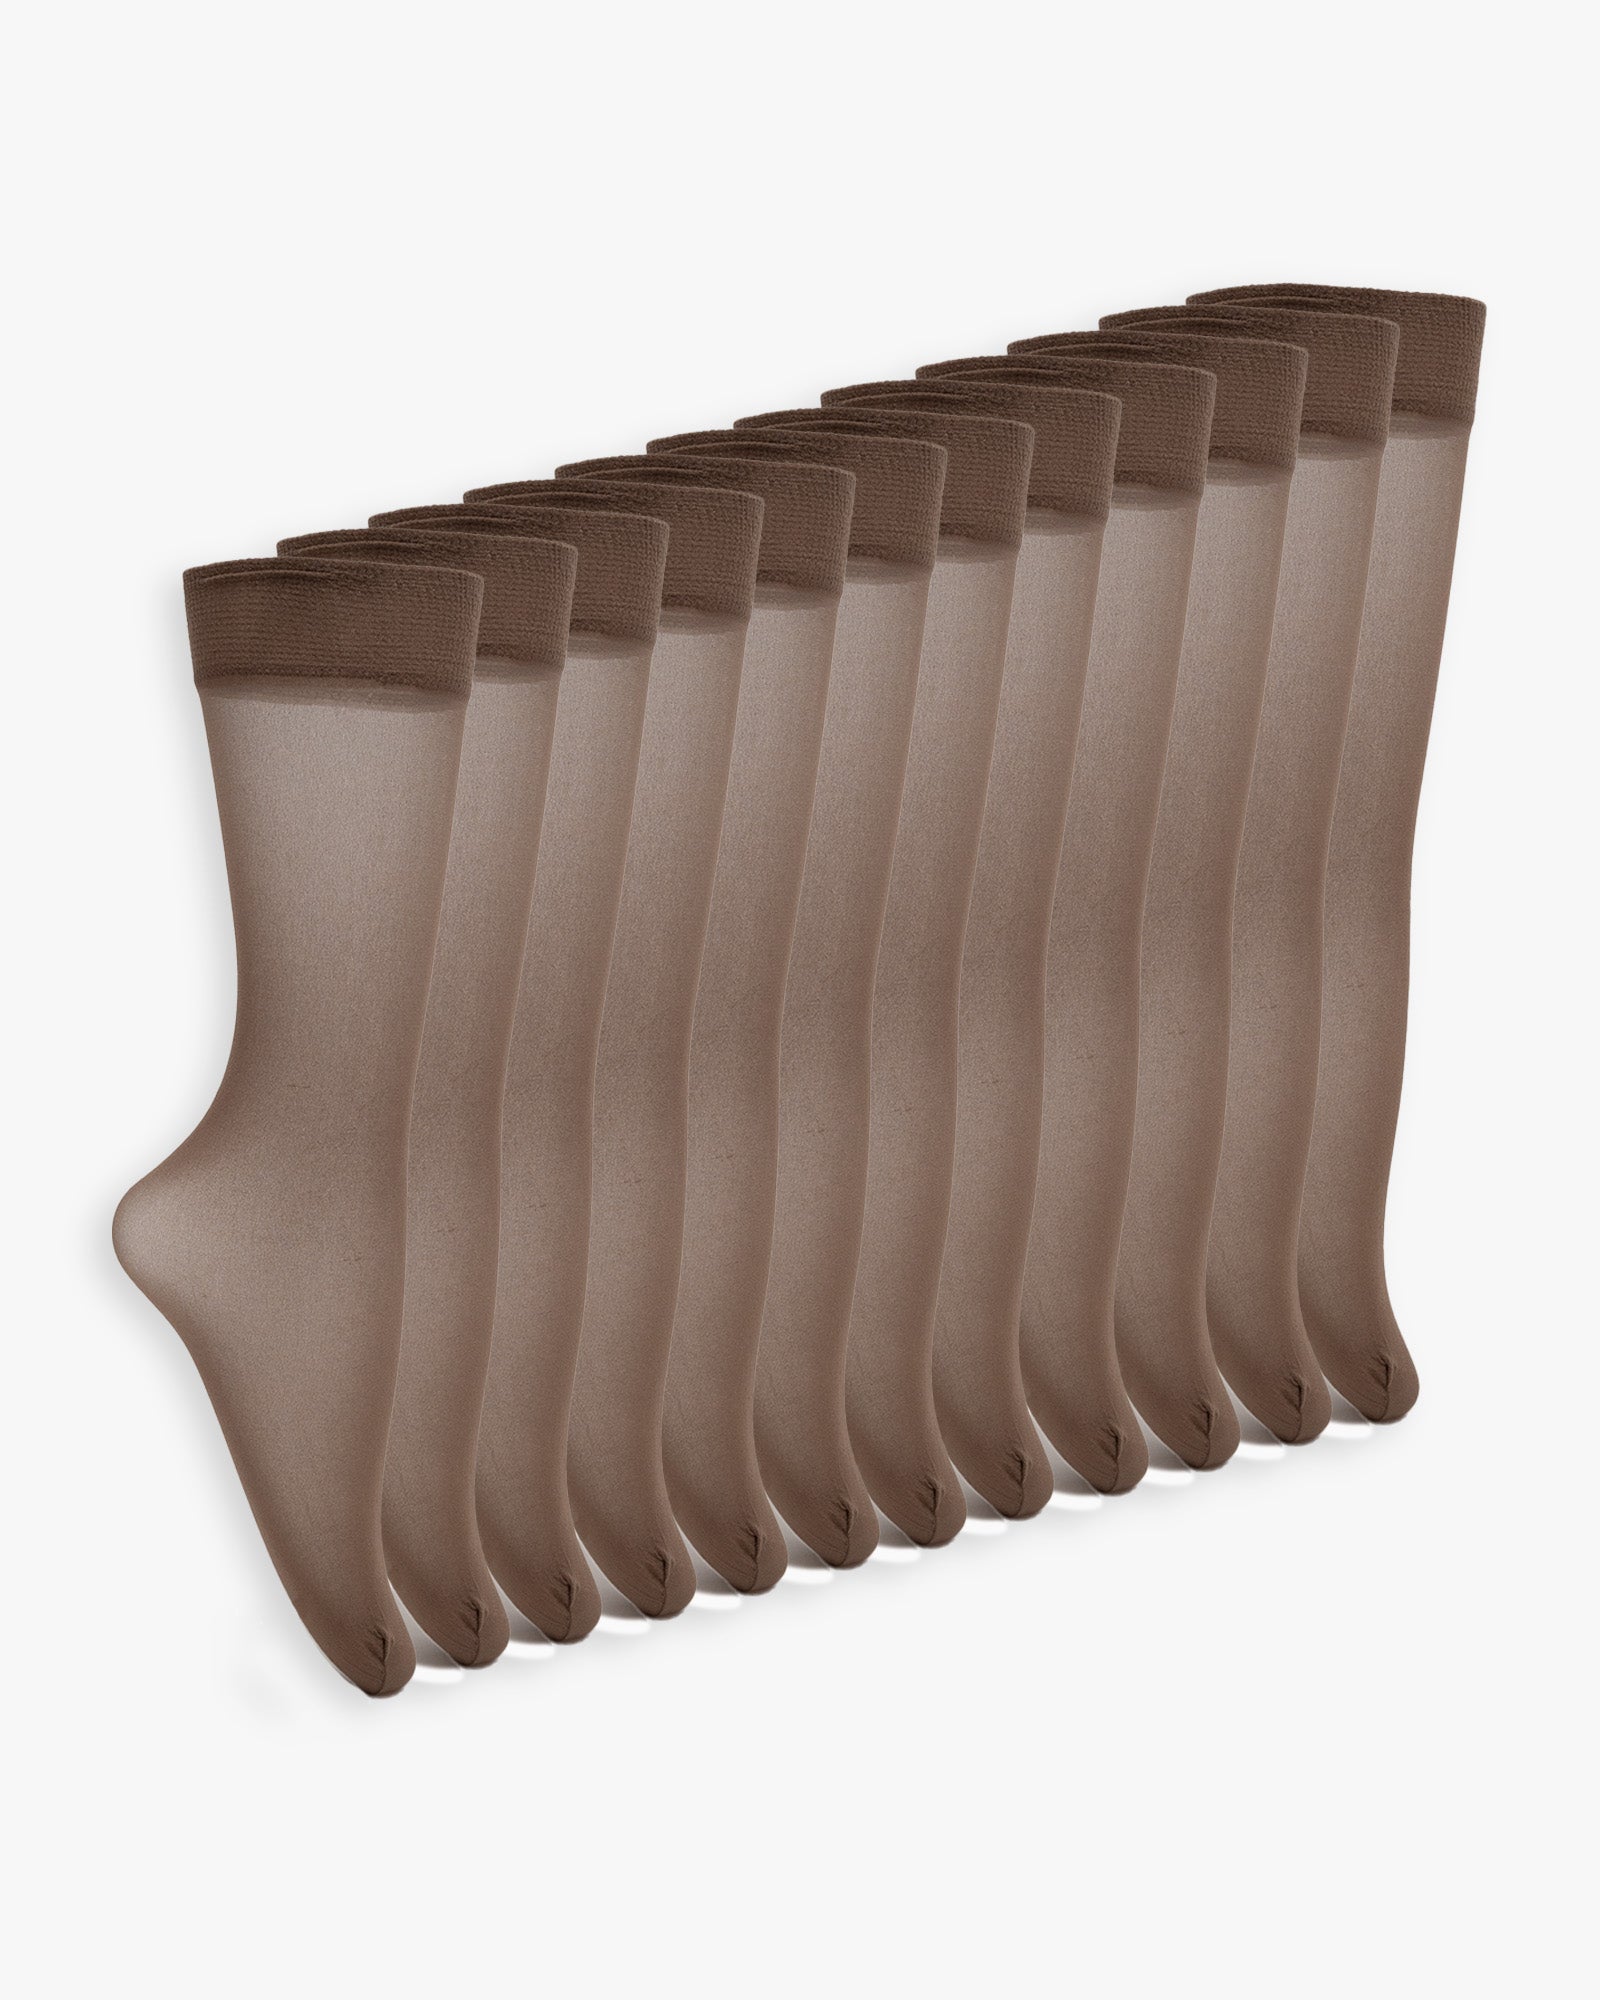 Sophi Pantyhose - 12-Pack Knee High | Queen Size